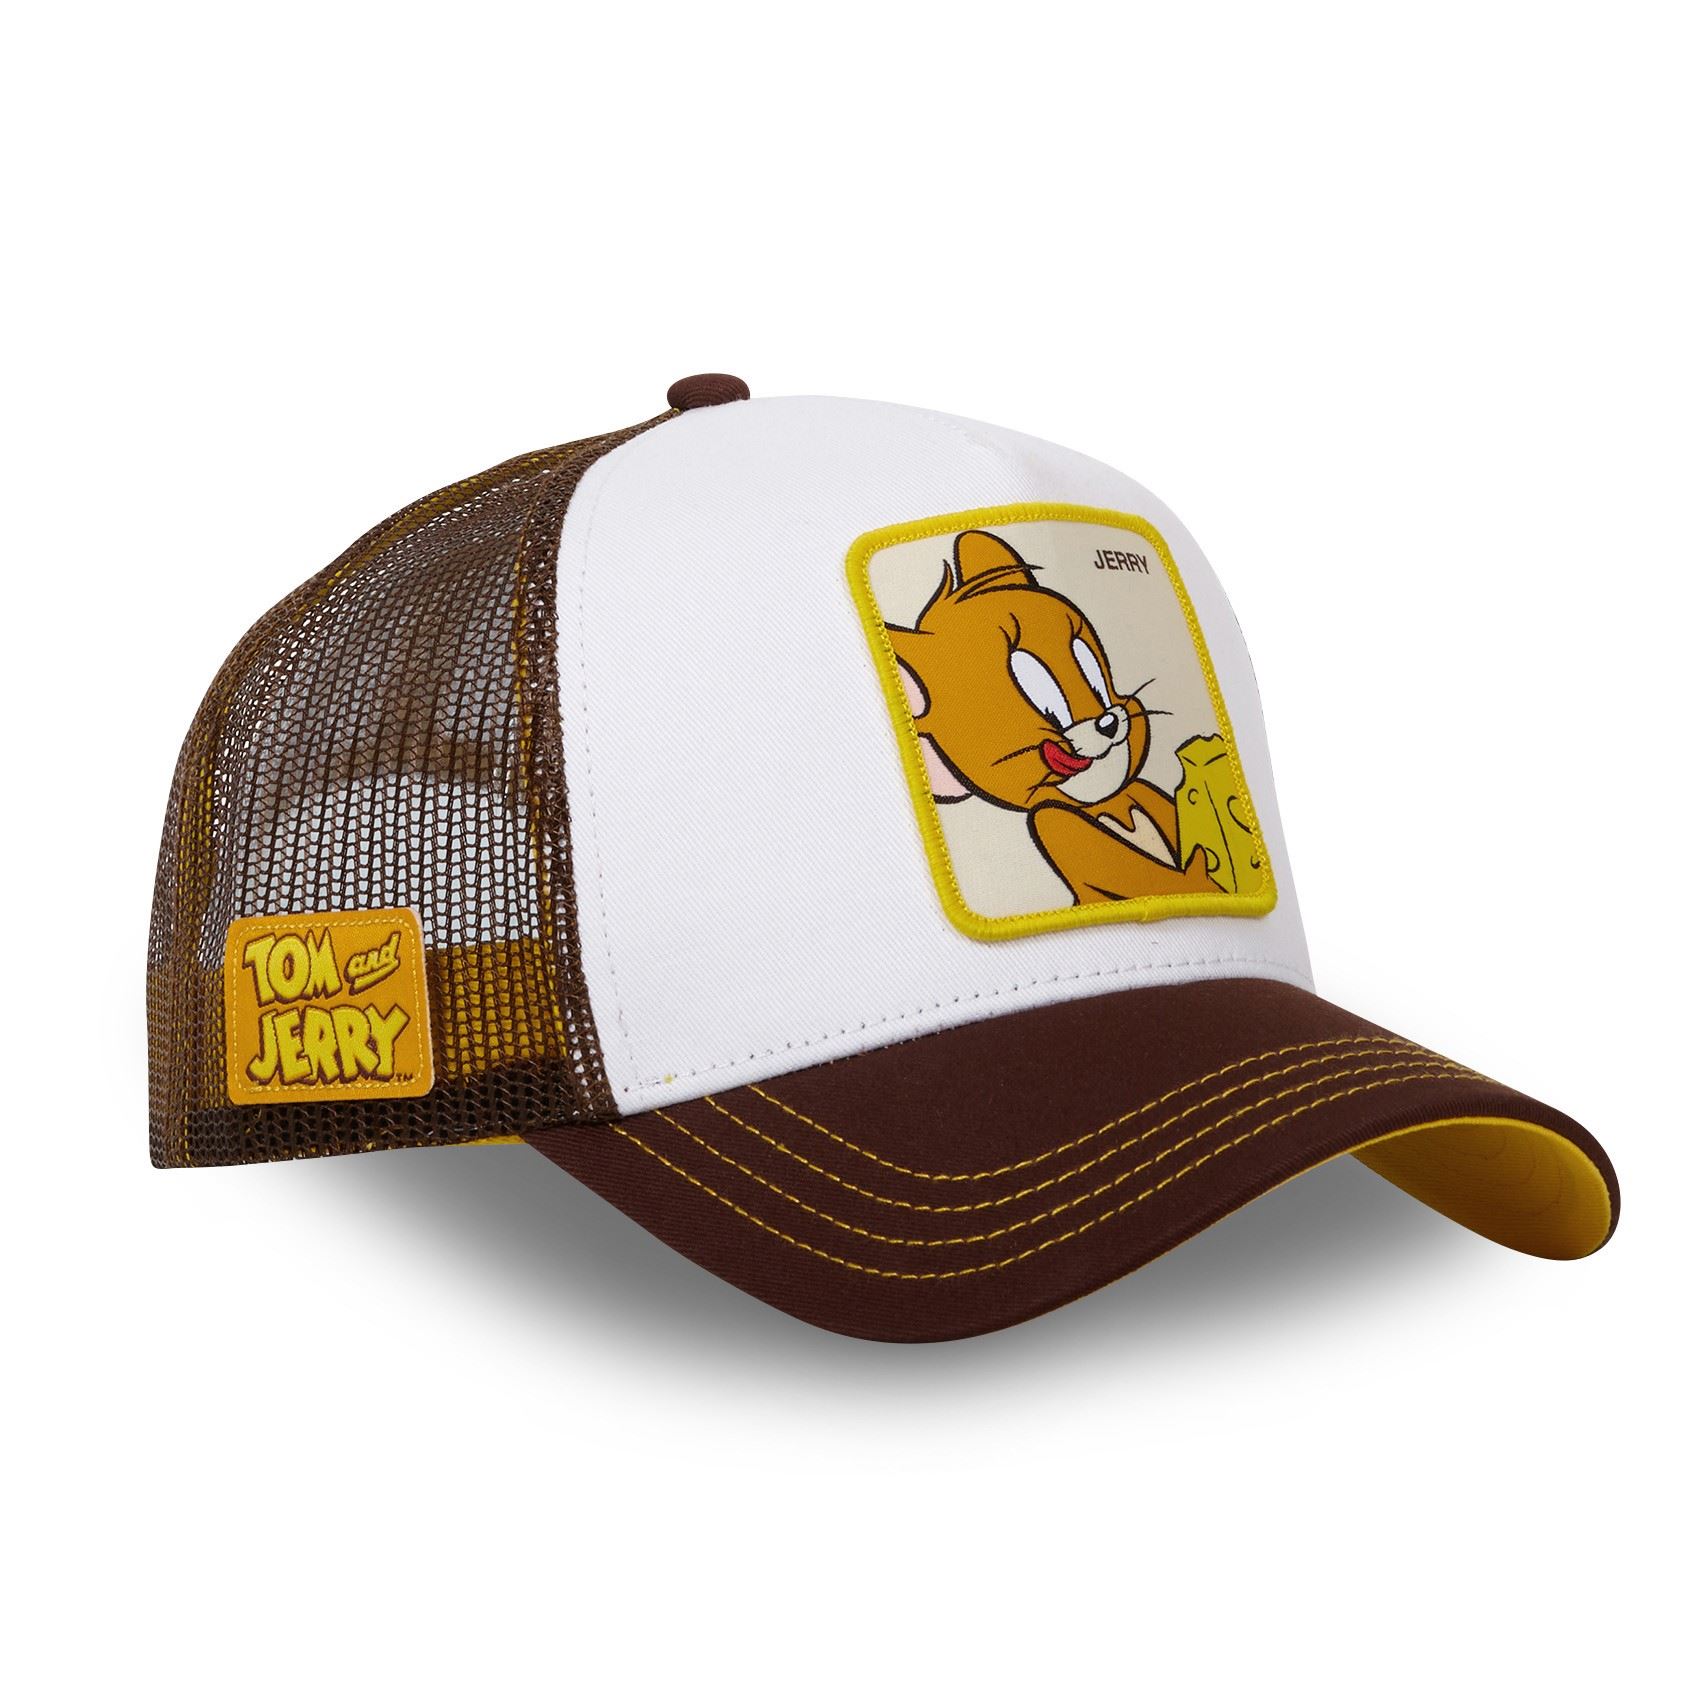 Jerry Tom and Jerry White Yellow Brown Trucker Cap Capslab